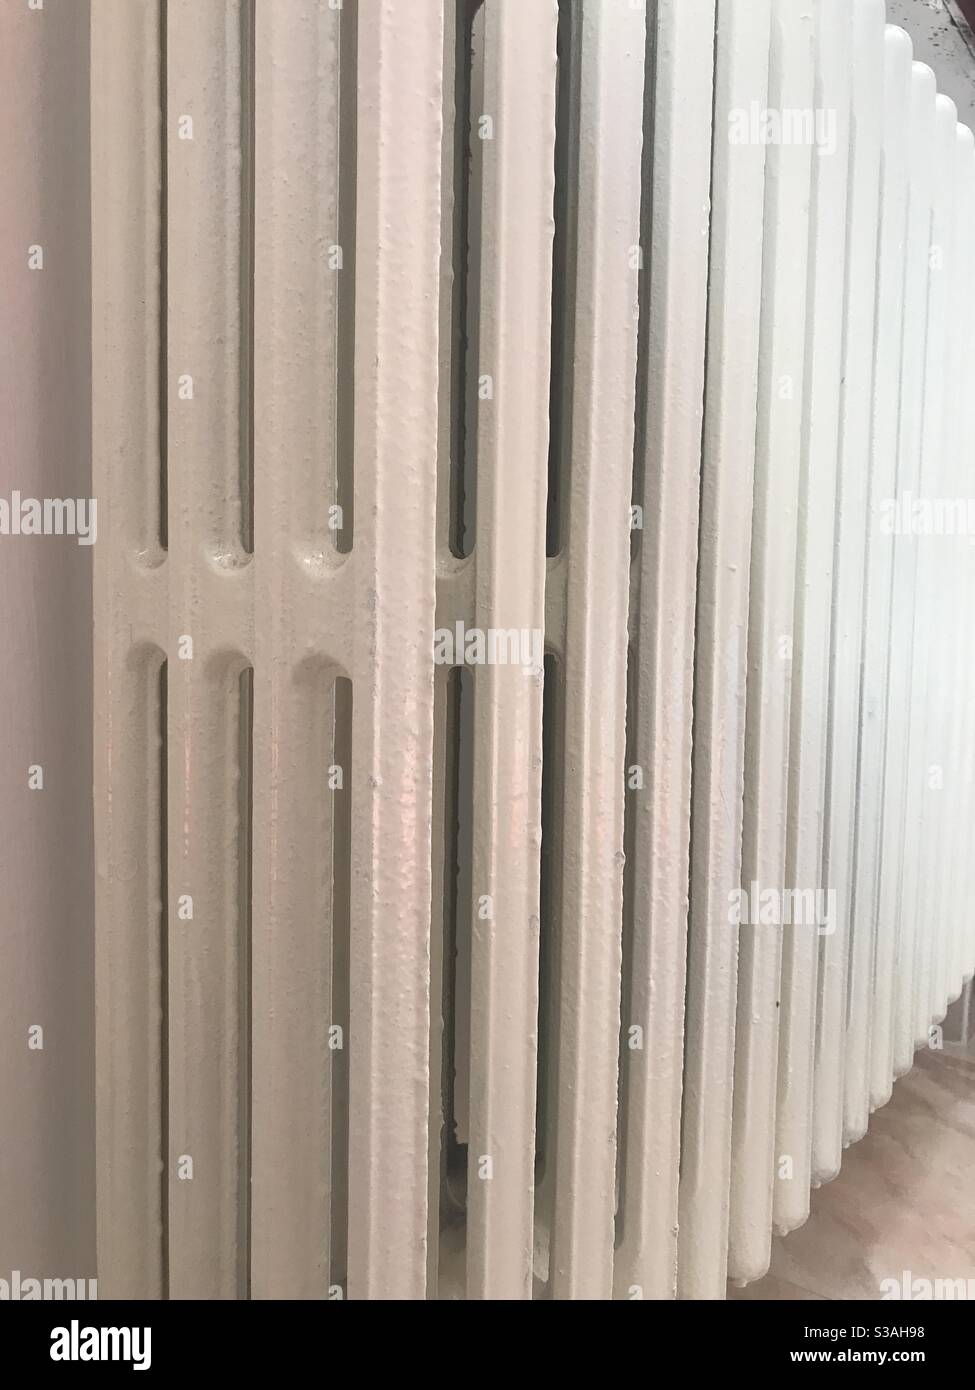 A white indoor radiator seen from an angle Stock Photo